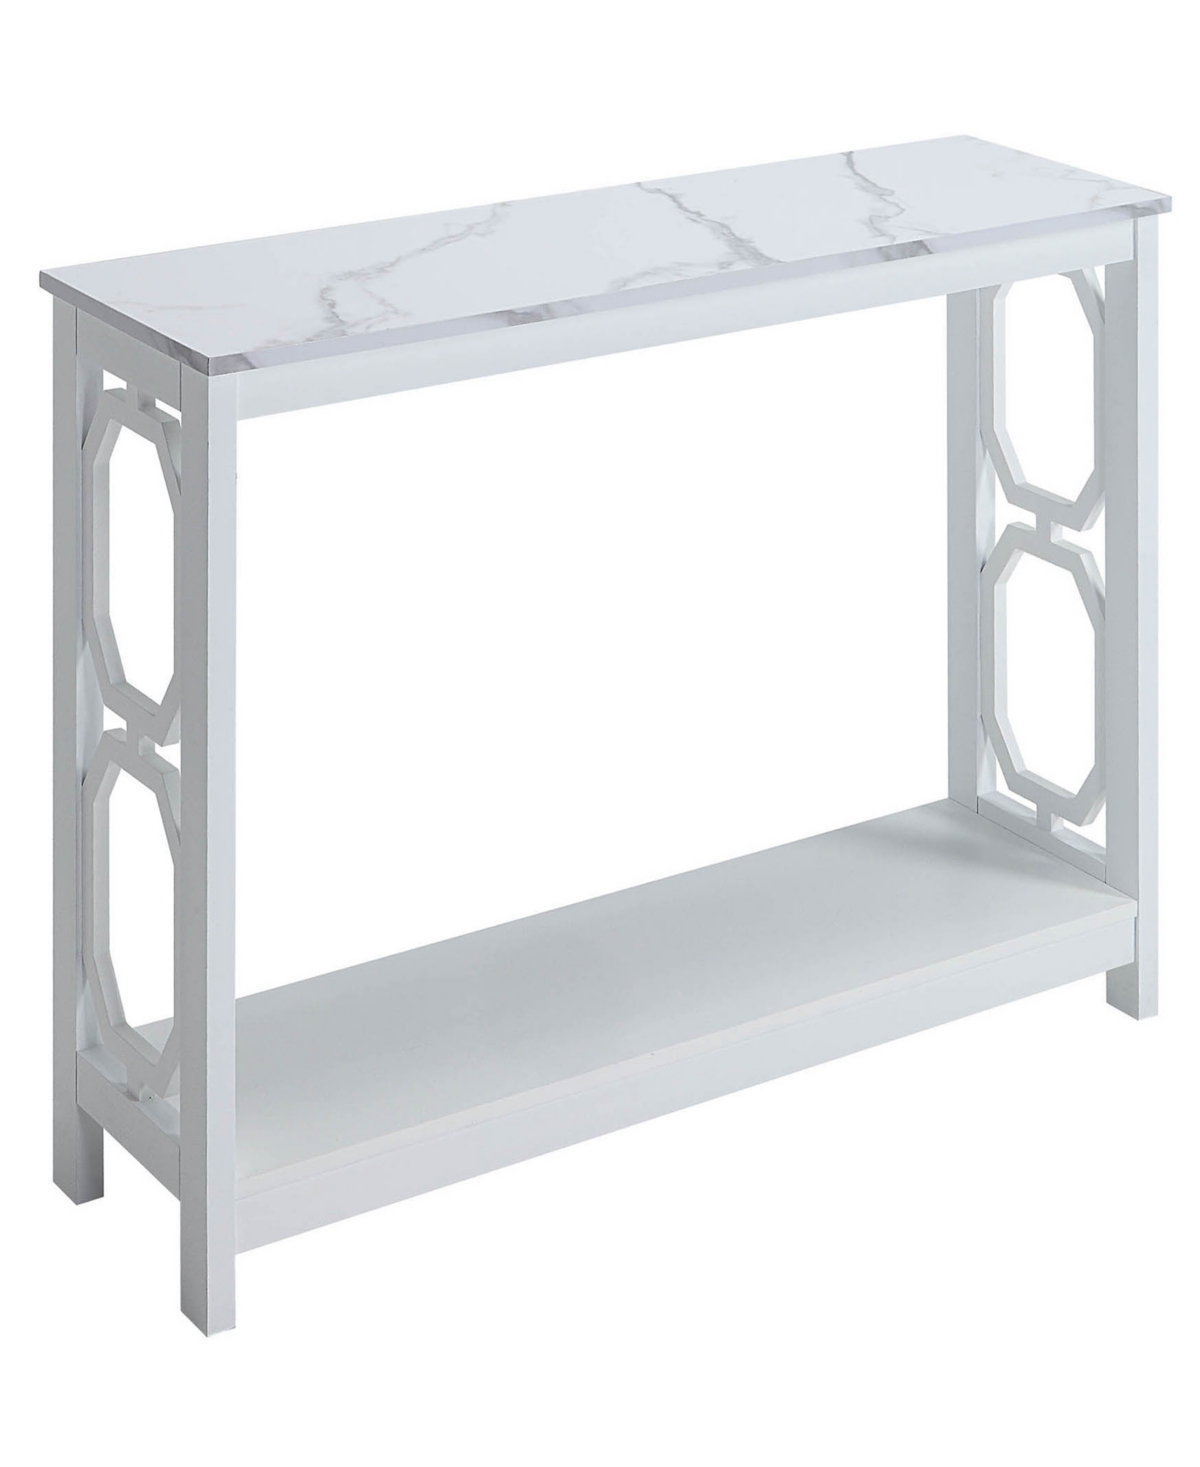 Convenience Concepts 39.5" Mdf Omega Console Table With Shelf In White Faux Marble,white